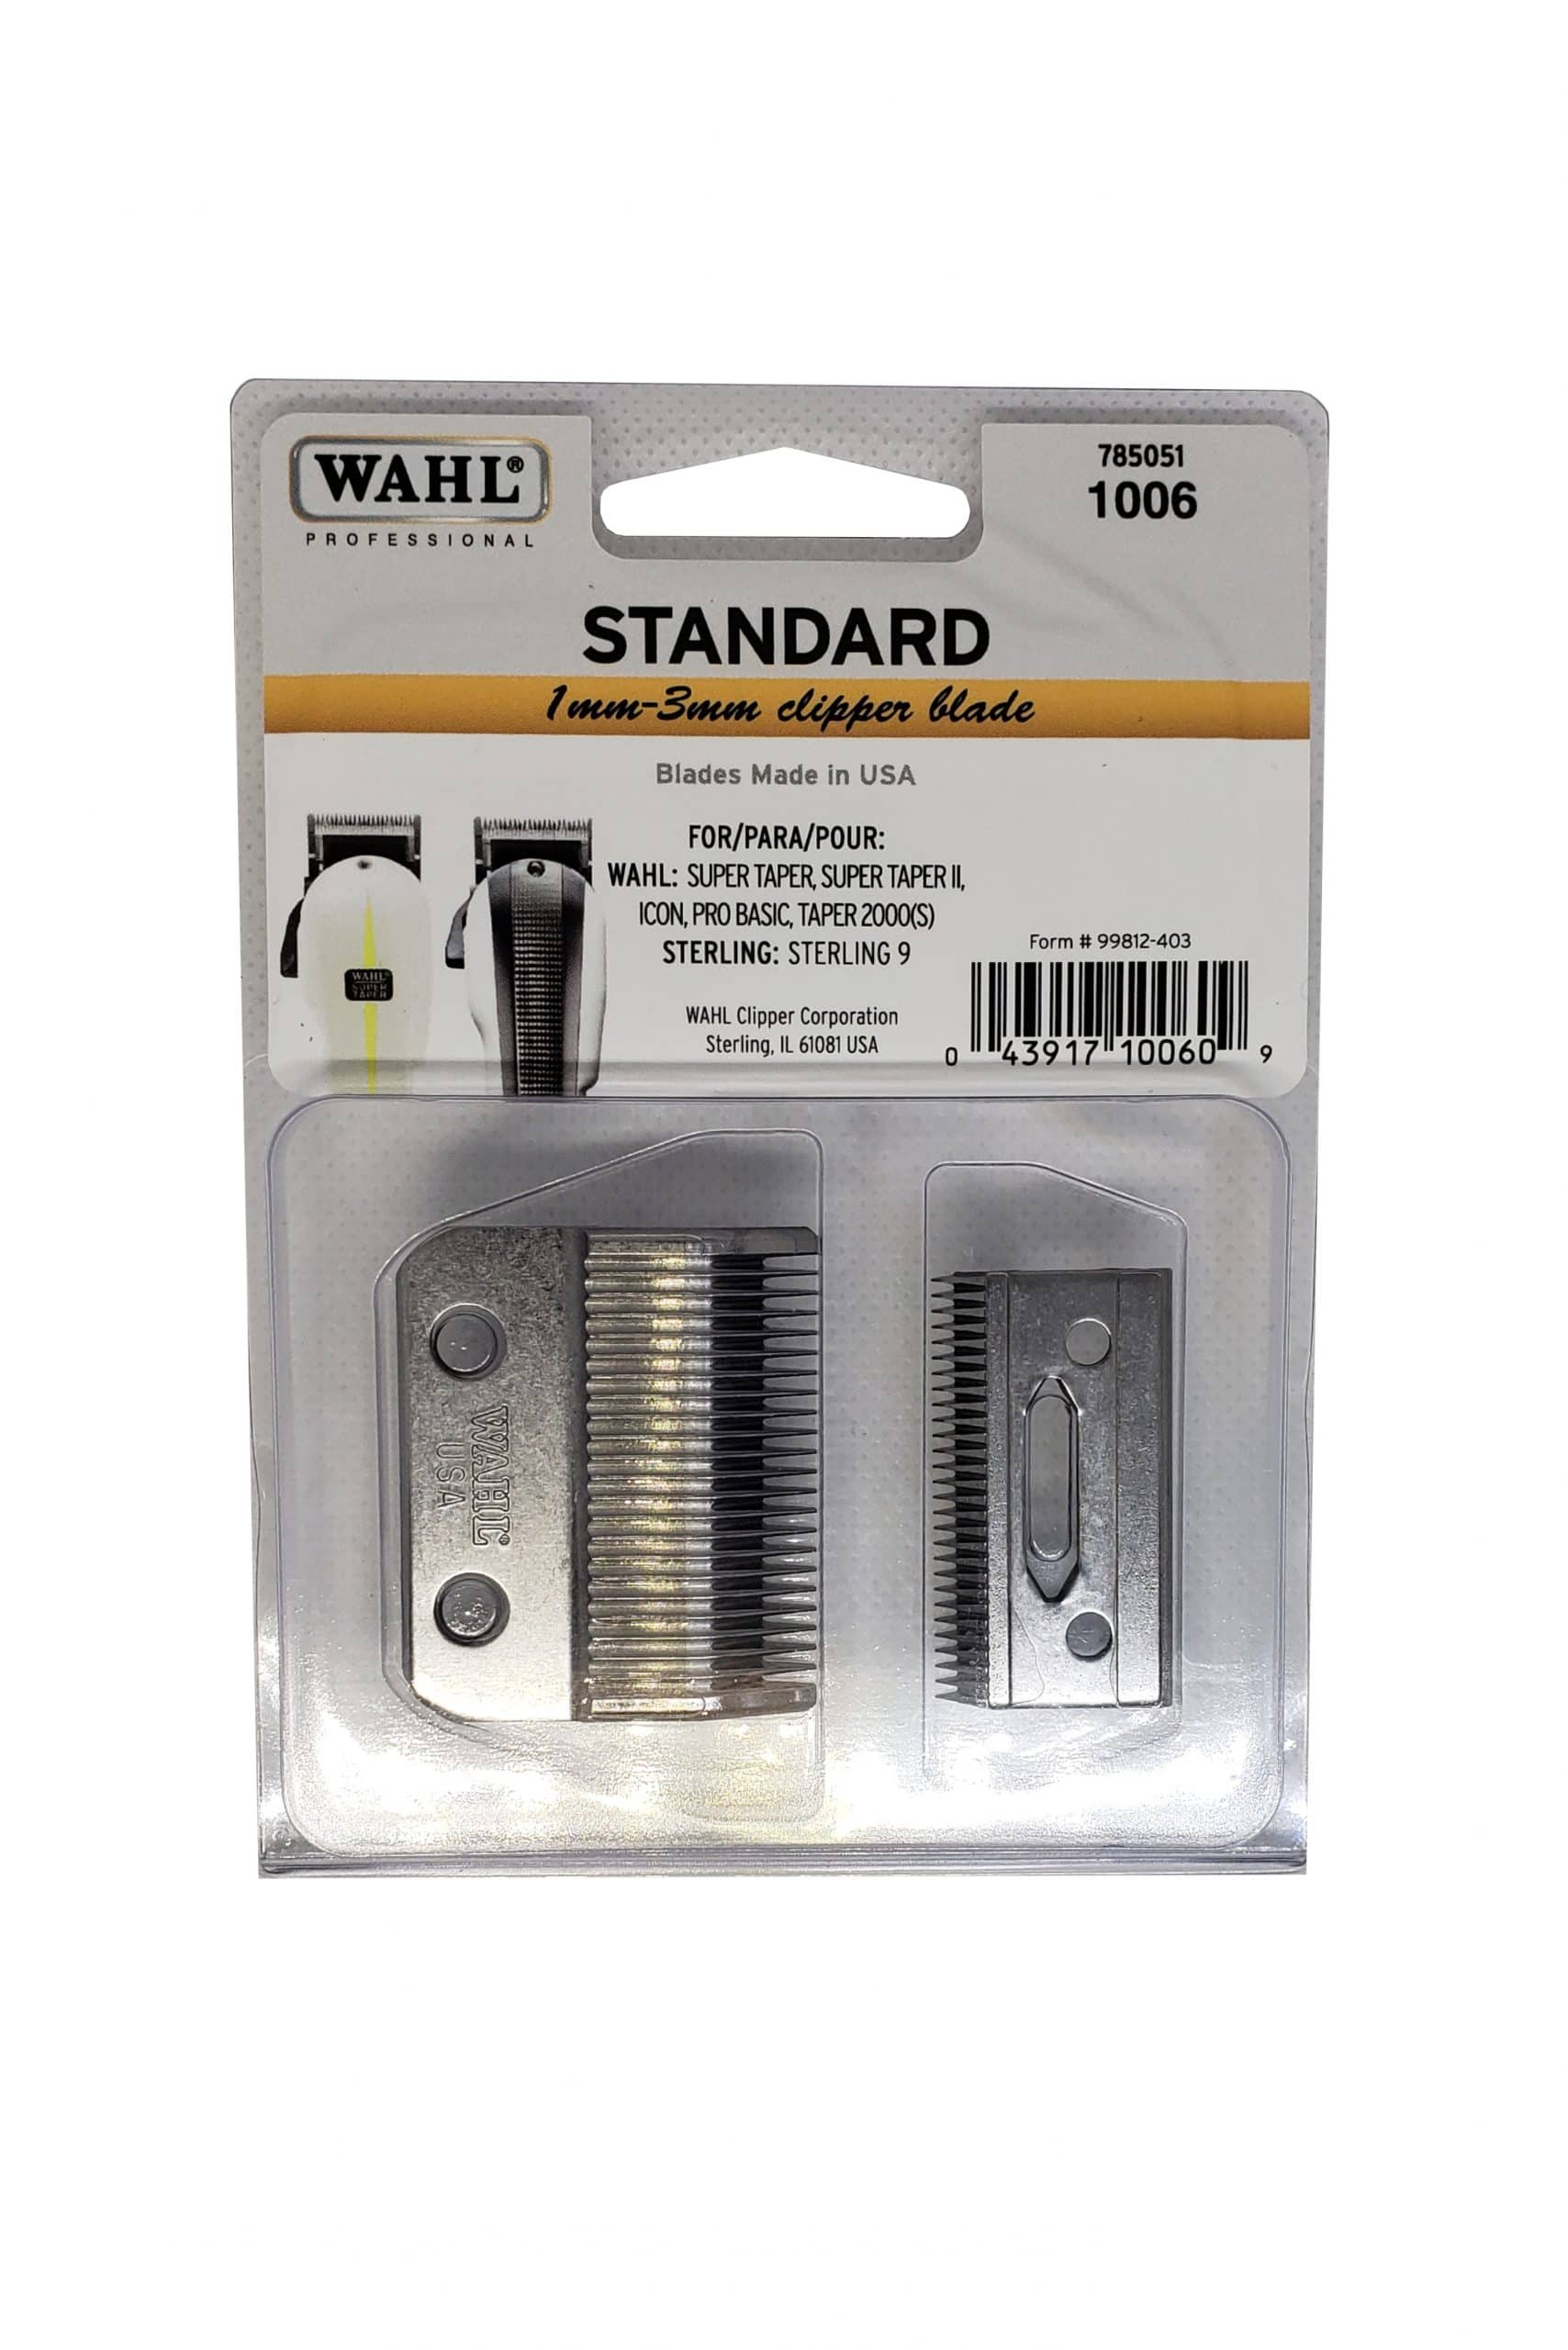 wahl super taper blade replacement